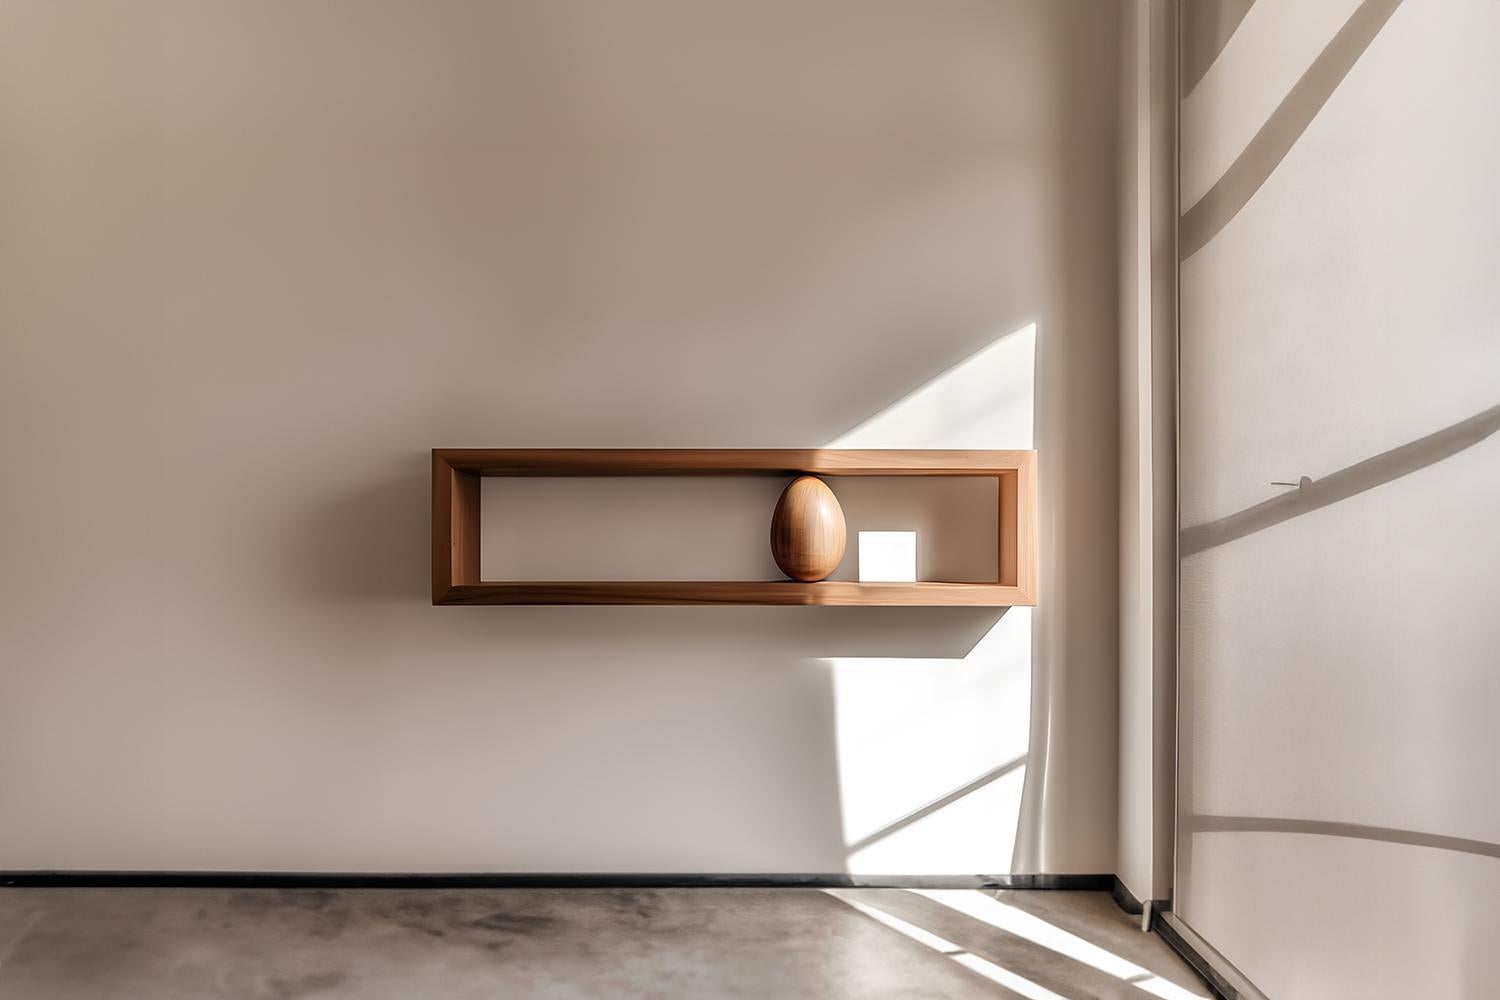 Rectangular Floating Shelf with Close Back and One Large Sculptural Wooden Pebble Accent, Sereno by Joel Escalona
—

What happens when the practical becomes art?
What happens when ornamentation gains significance?

Those were the questions Joel